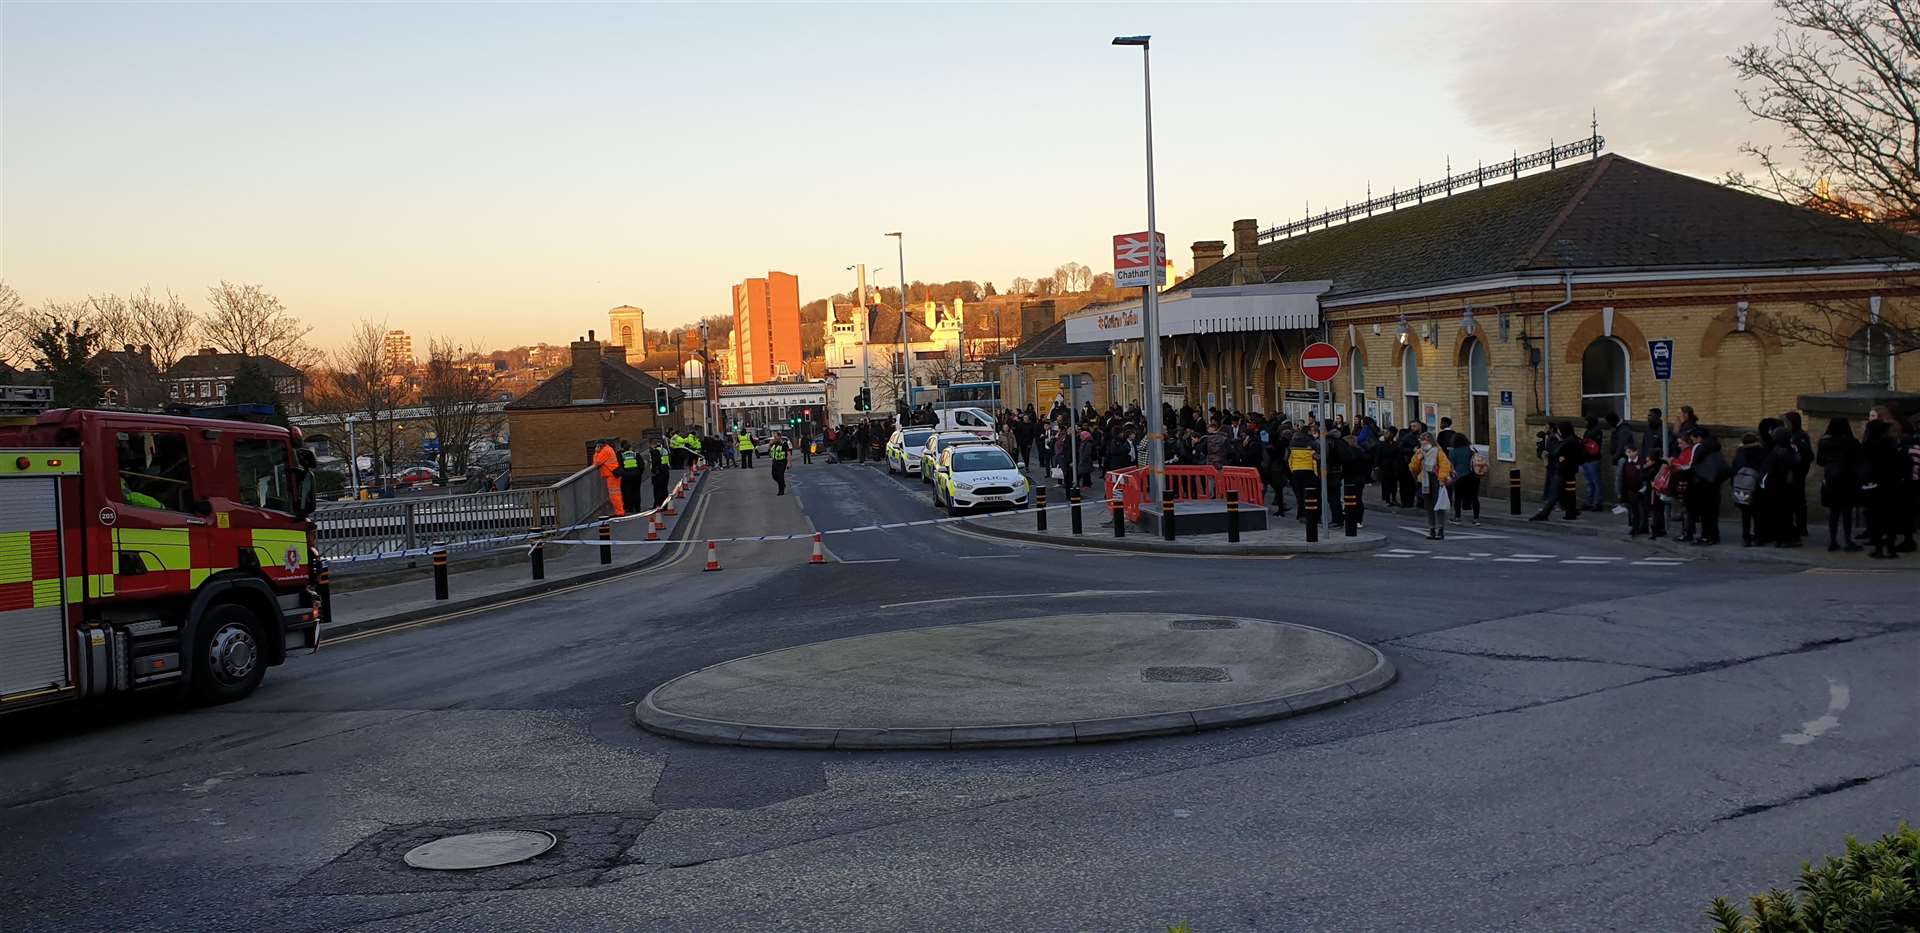 Hundreds of people can be seen outside Chatham Railway Station after a man was spotted on the bridge. Picture: Kim Young